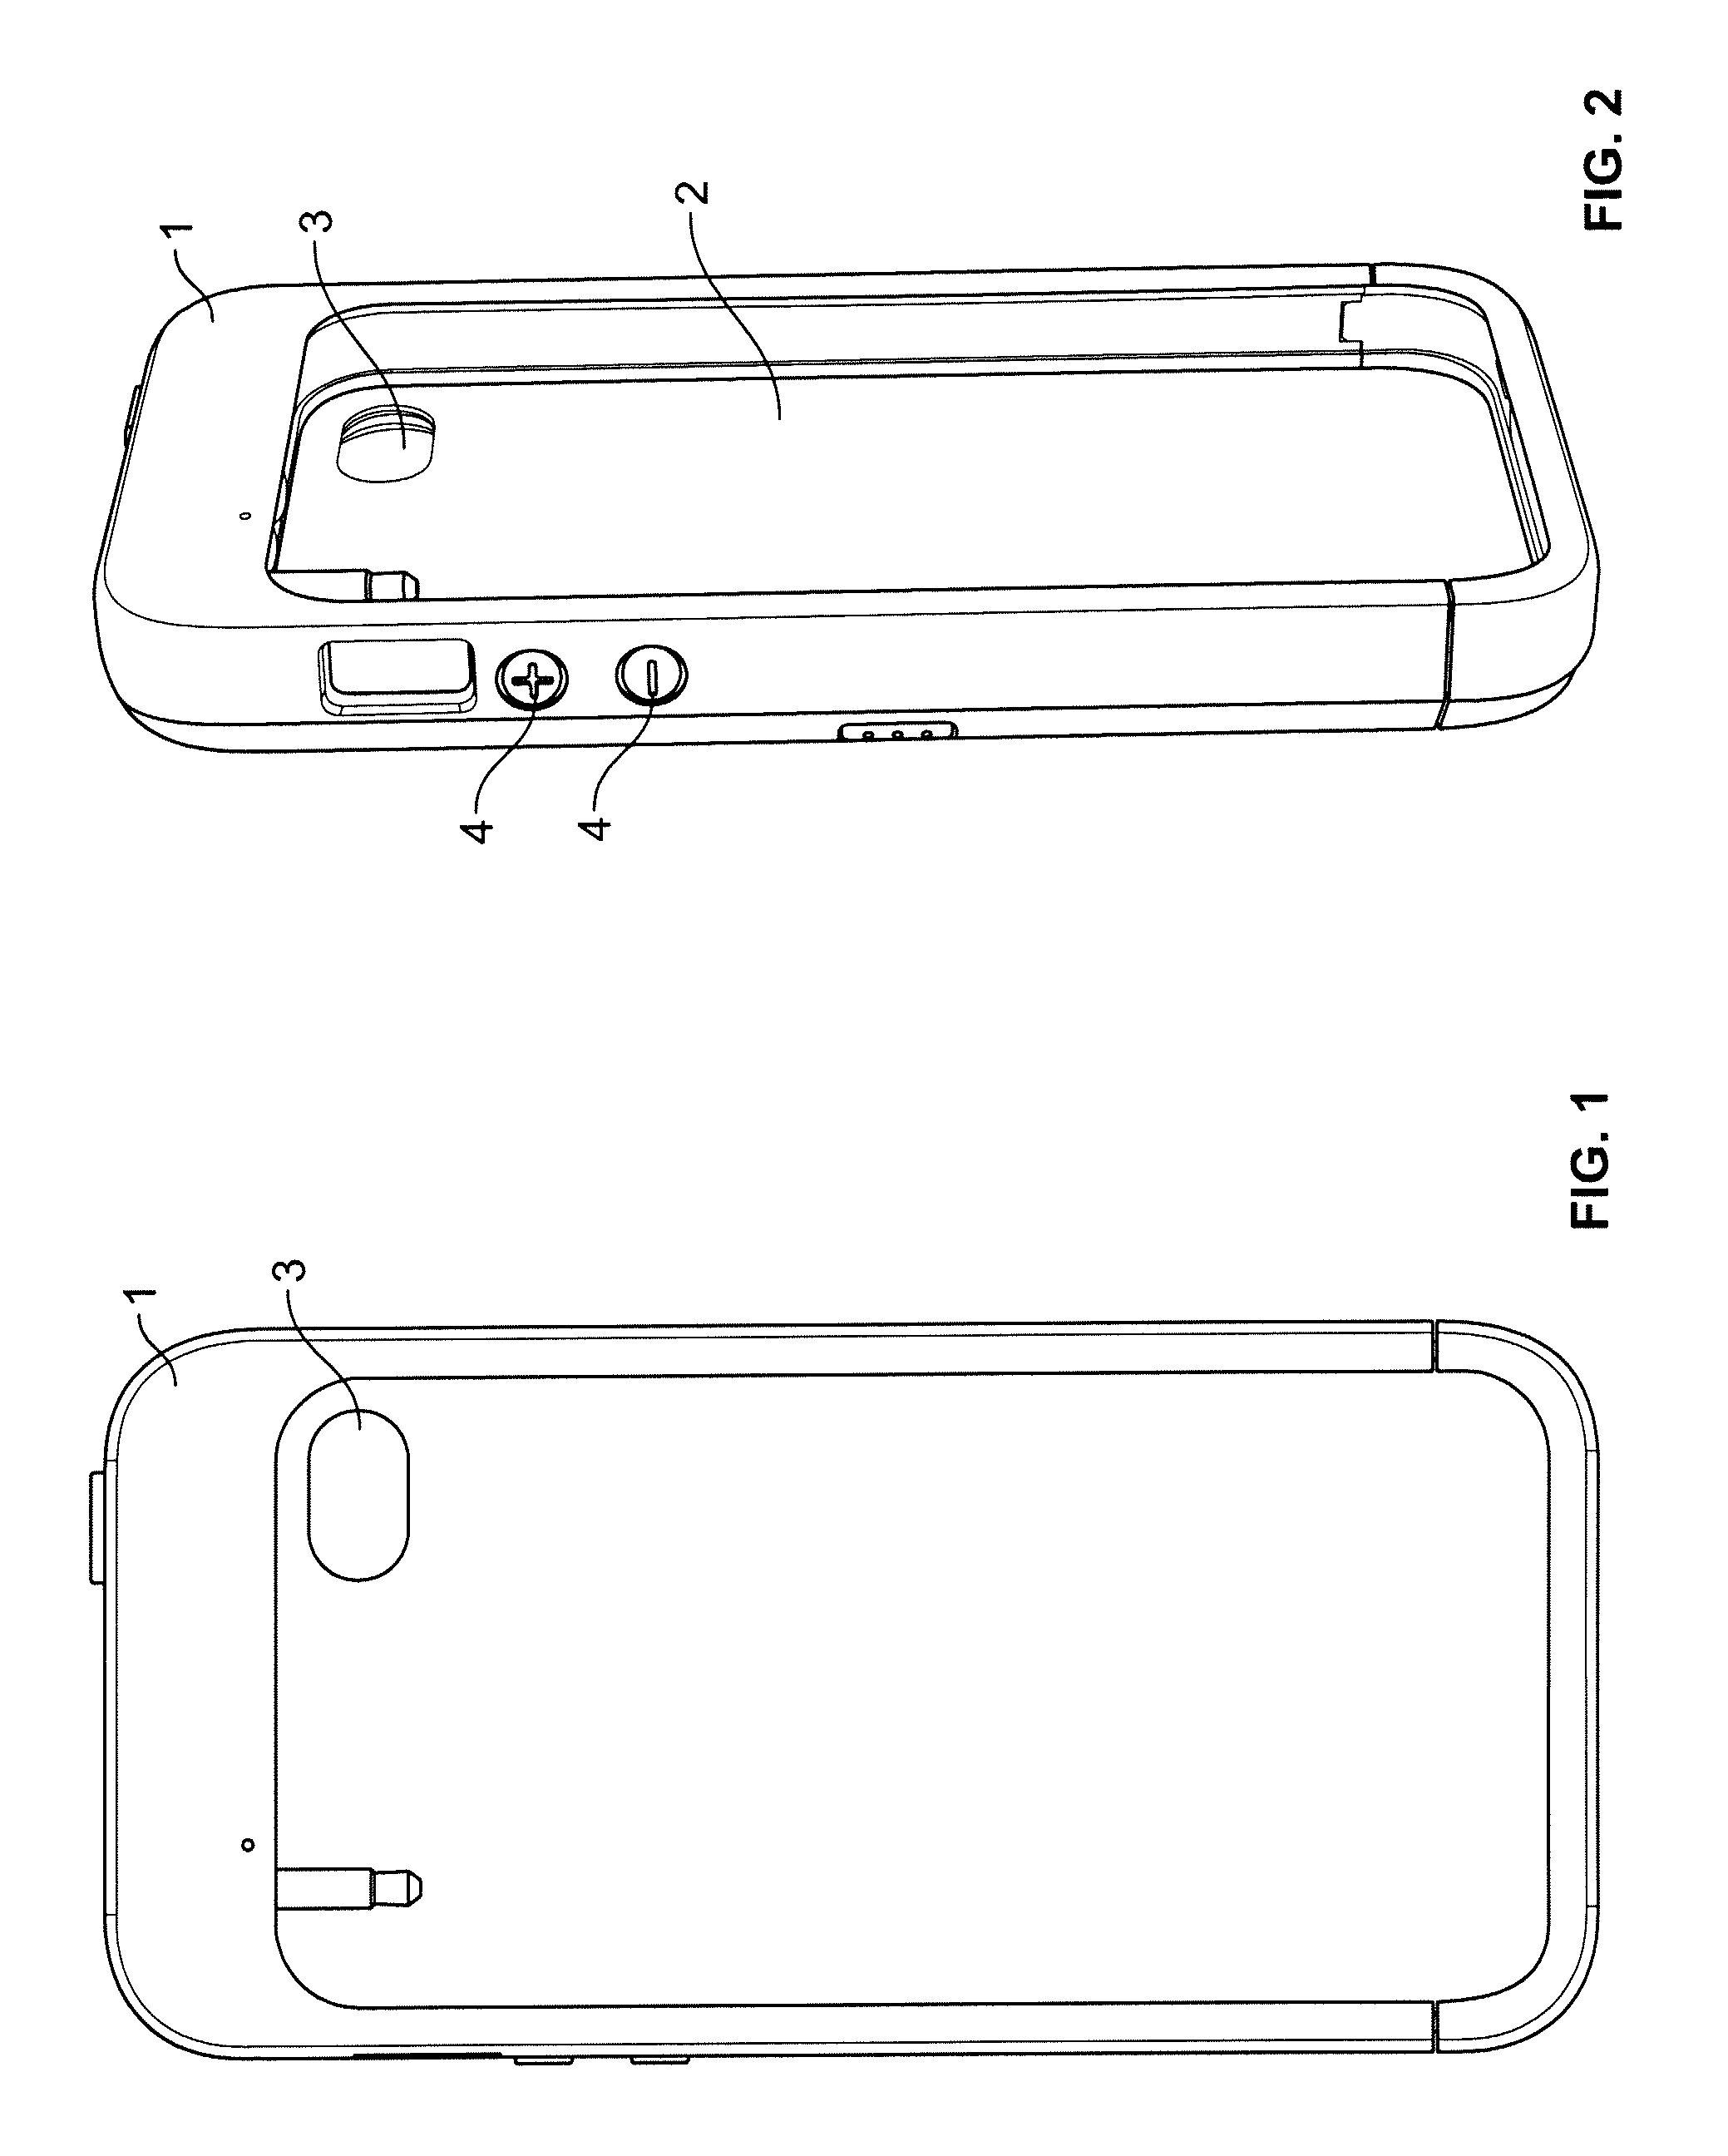 Health risk,mitigating, retractable, wired headset and protective case platform for wireless communication devices